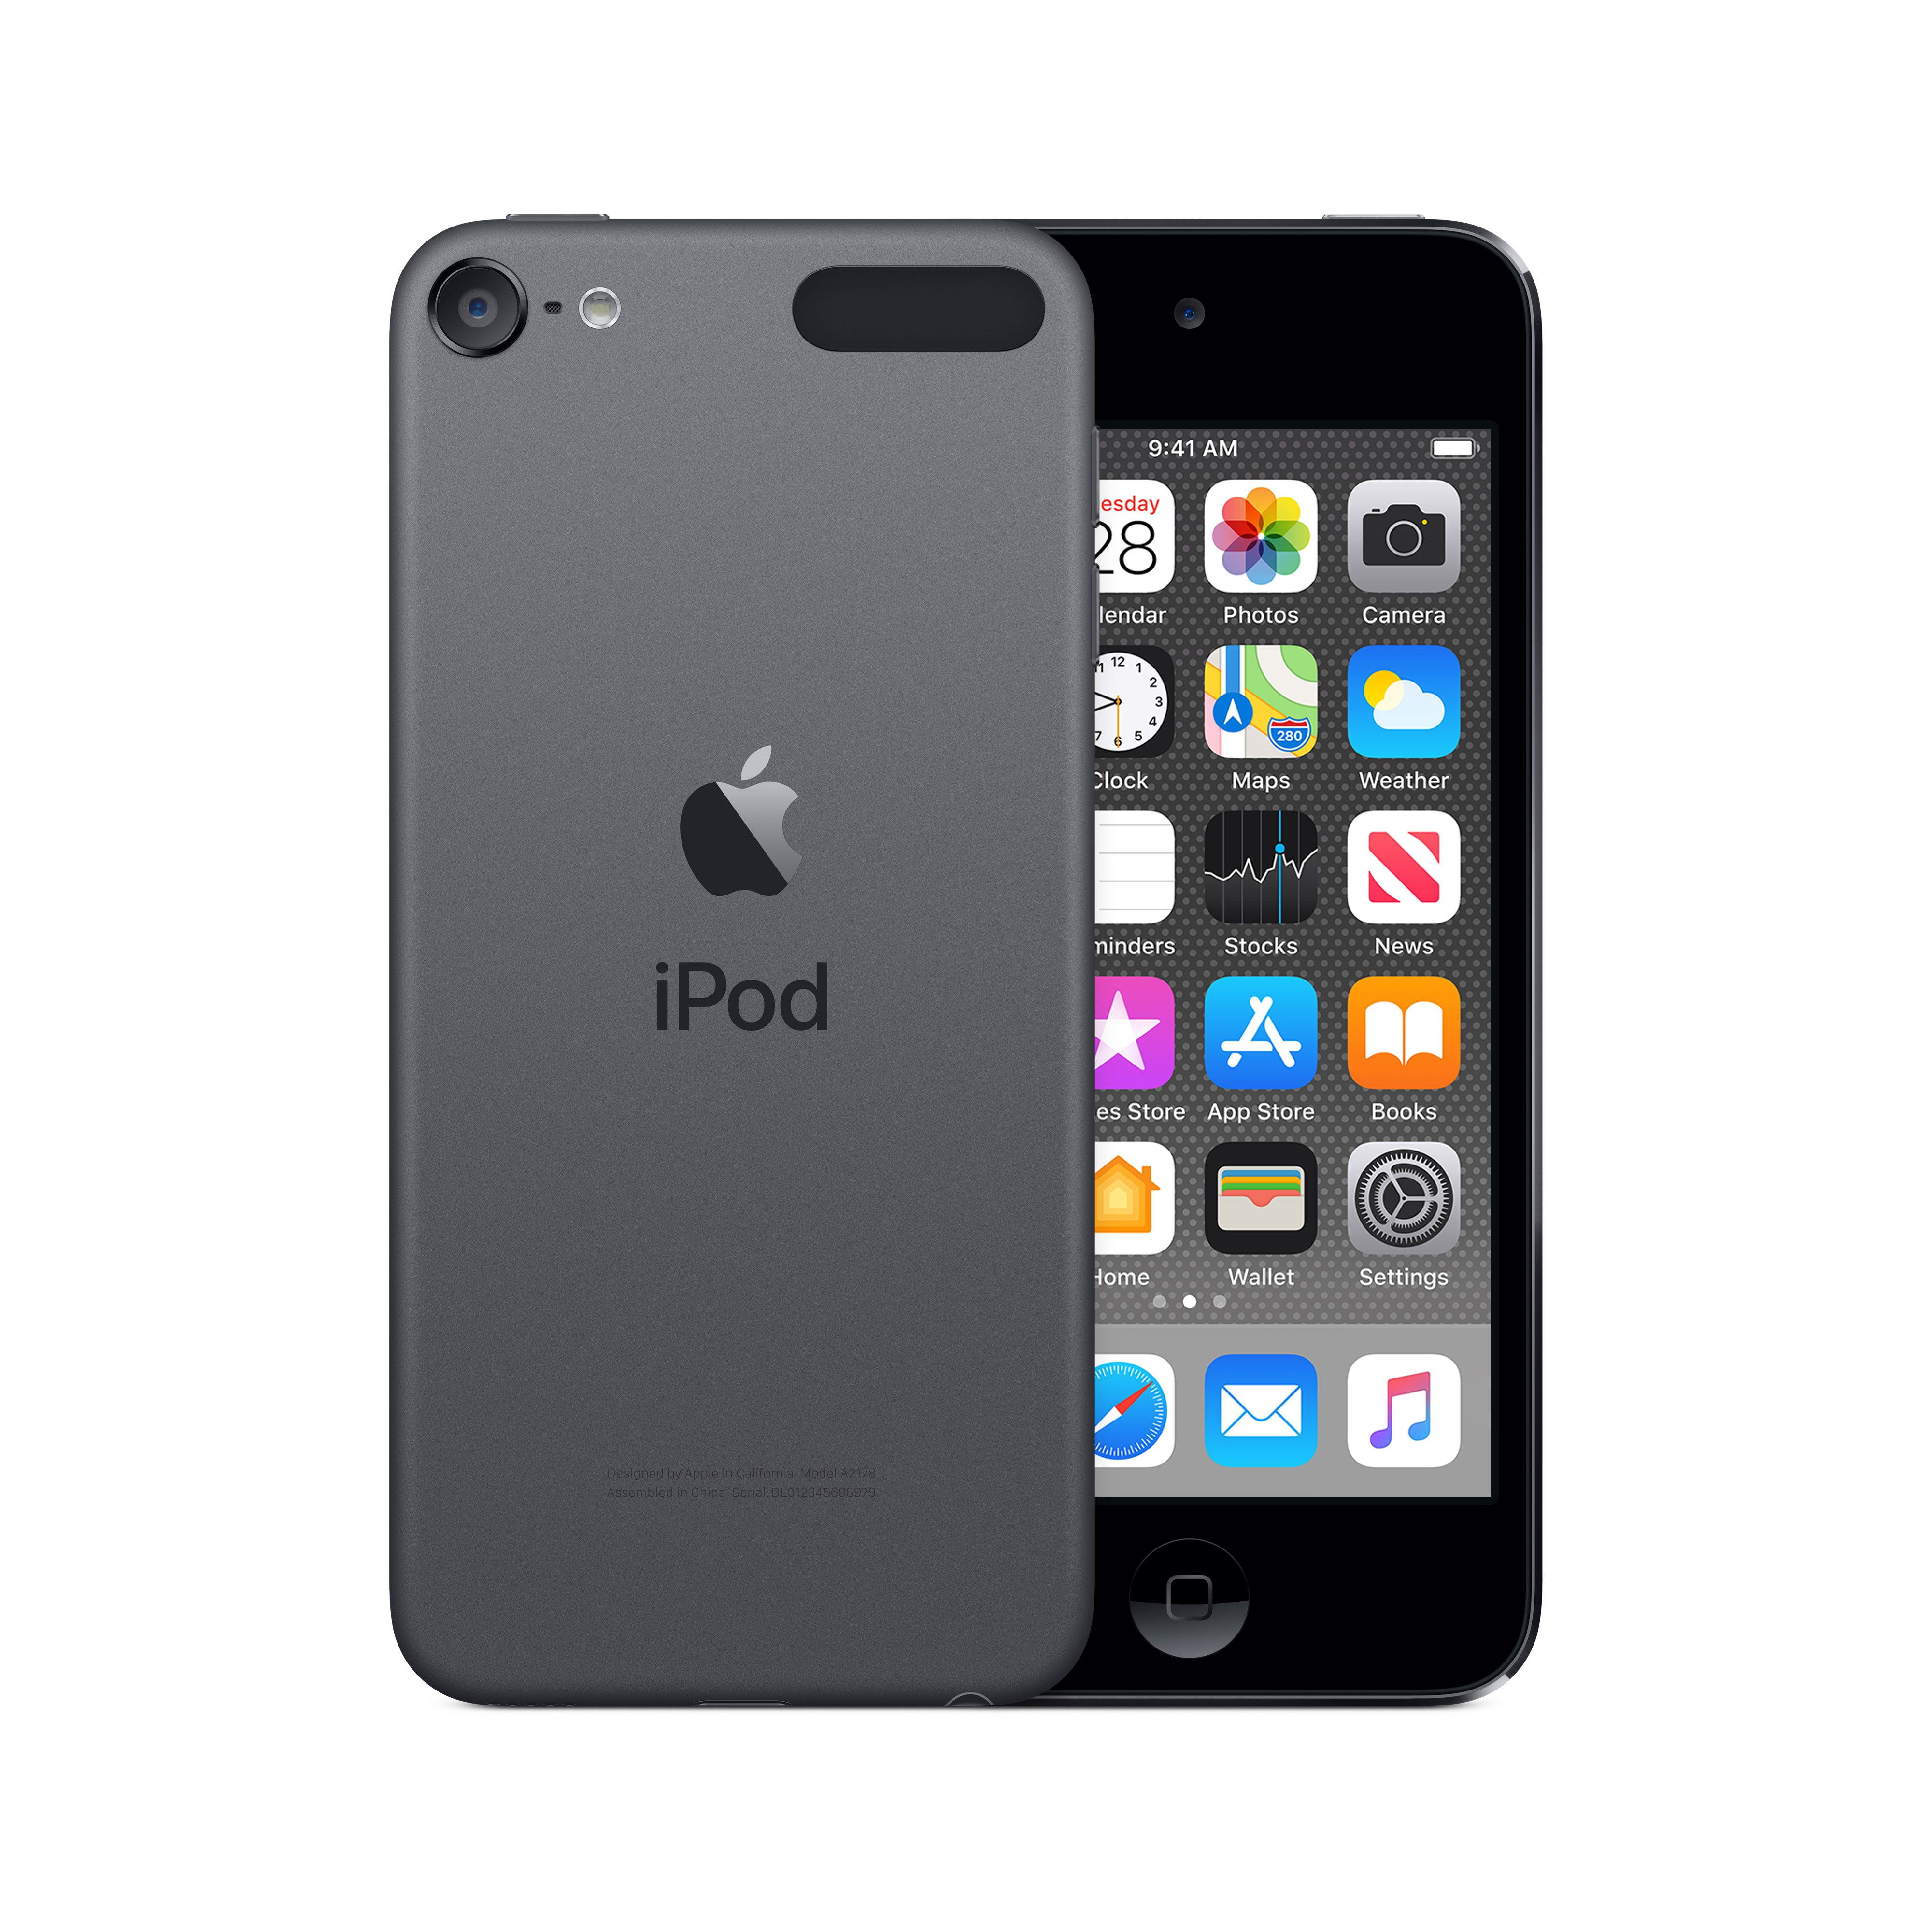 Apple iPod touch 7th Generation 32GB - Space Gray (New Model) - image 1 of 6